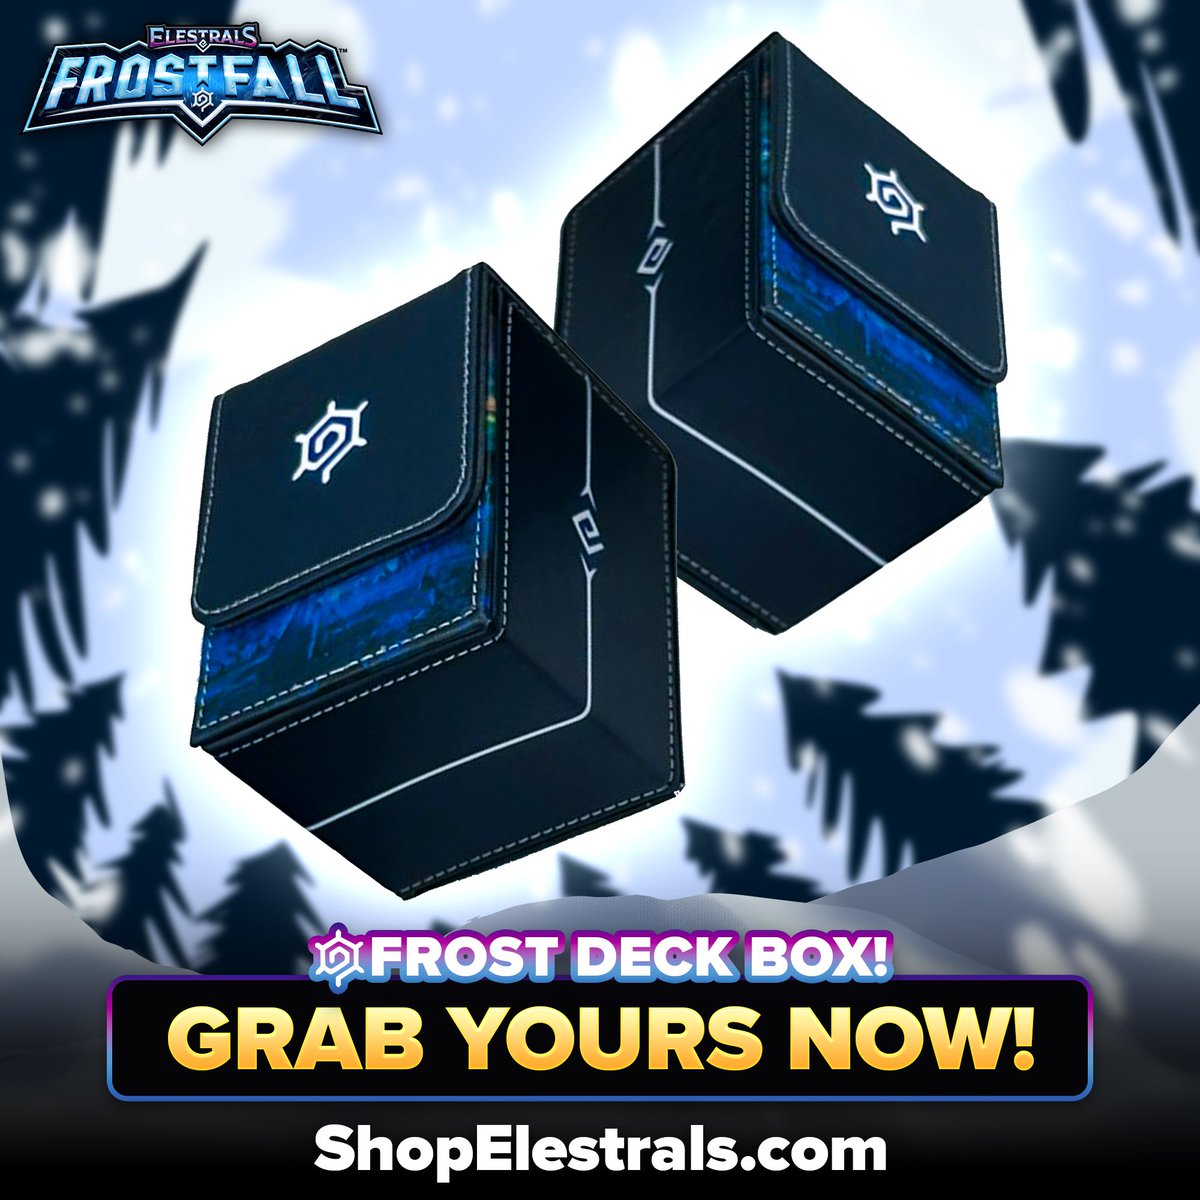 Frostfall is almost here, Casters! You’re going to want to keep your Frost Decks nice and safe, and there’s no better option than our Frost Deck Box! ❄❄❄

Pre-order yours today!: shopelestrals.com/products/frost…

#Elestrals #TCG #Frostfall